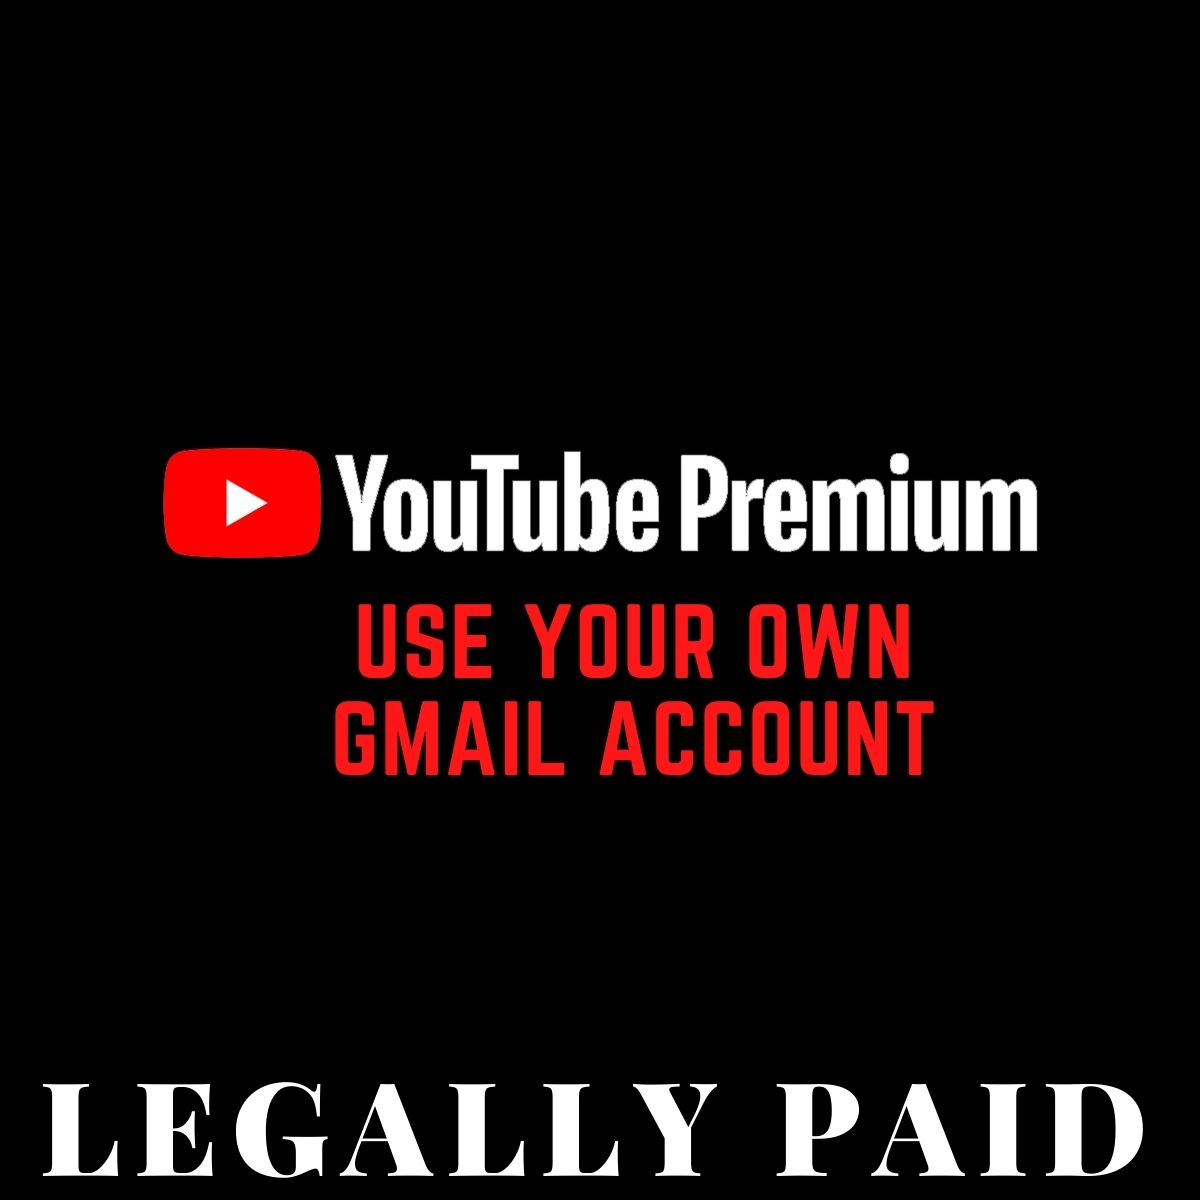 YOUTUBE PREMIUM UPGRADE 3 MONTHS (LEGALLY PAID)